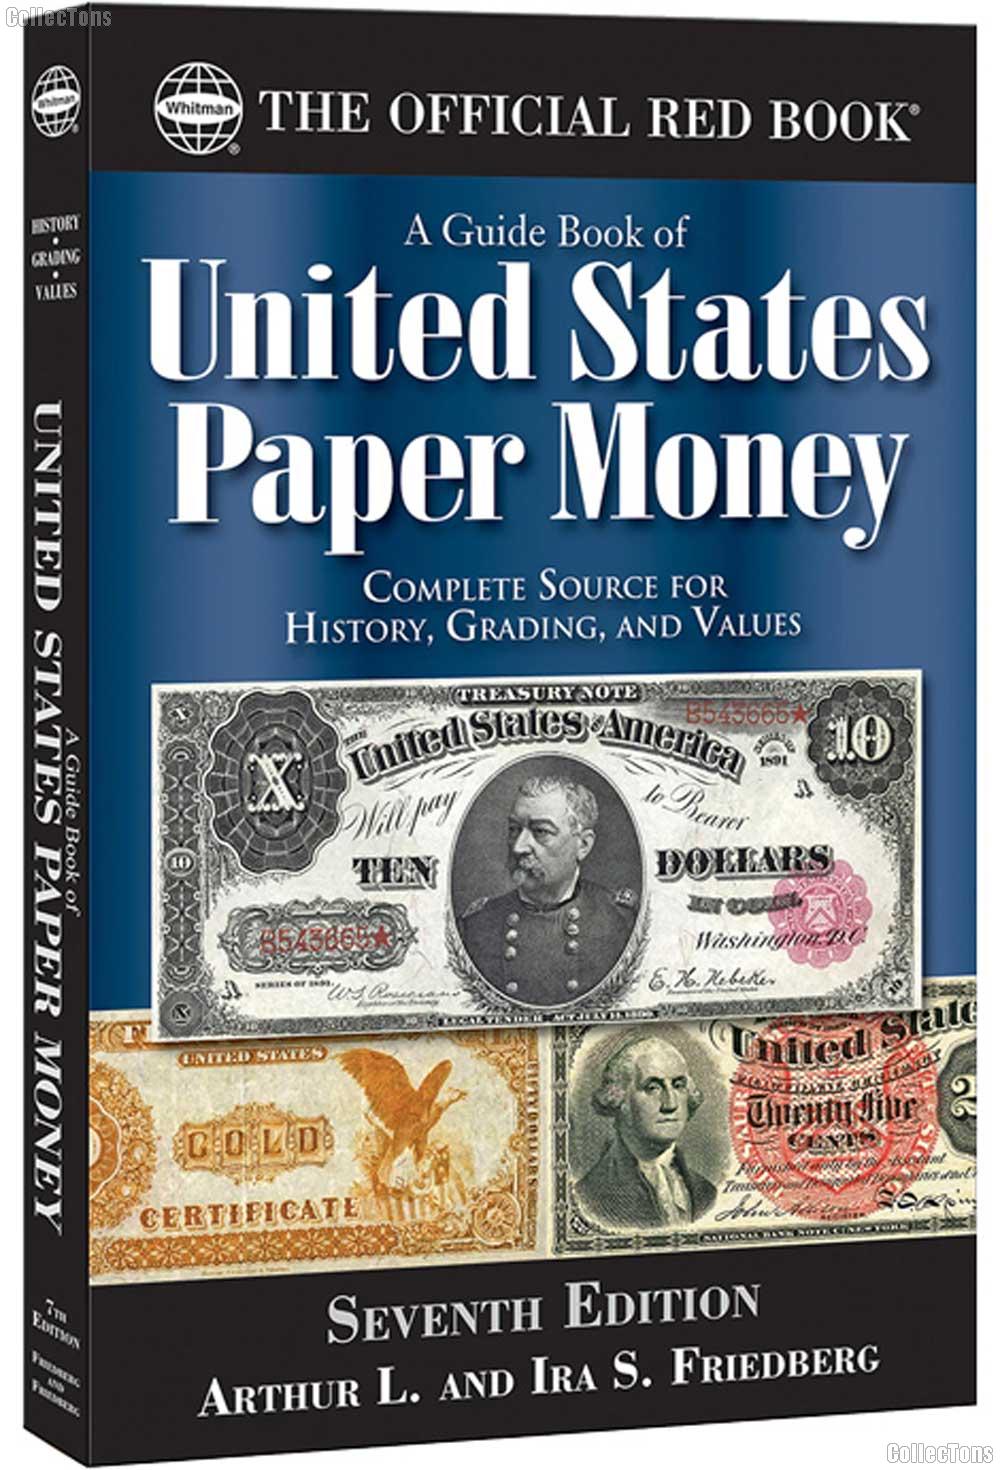 The Official Red Book: A Guide Book of United States Paper Money 7th Edition - Friedberg